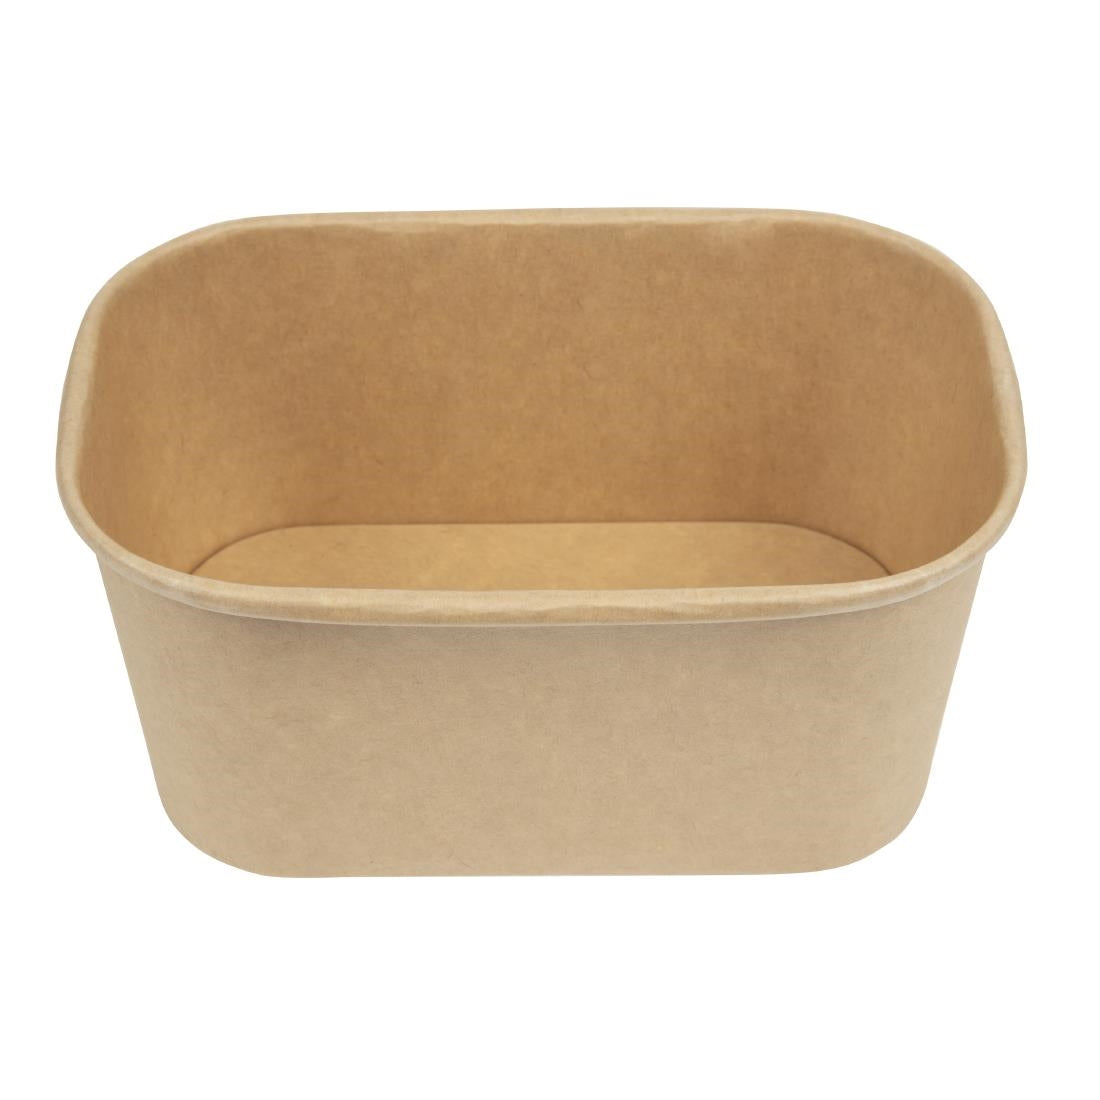 FP459 Colpac Stagione Recyclable Microwavable Food Boxes 1Ltr / 35oz (Pack of 300) JD Catering Equipment Solutions Ltd